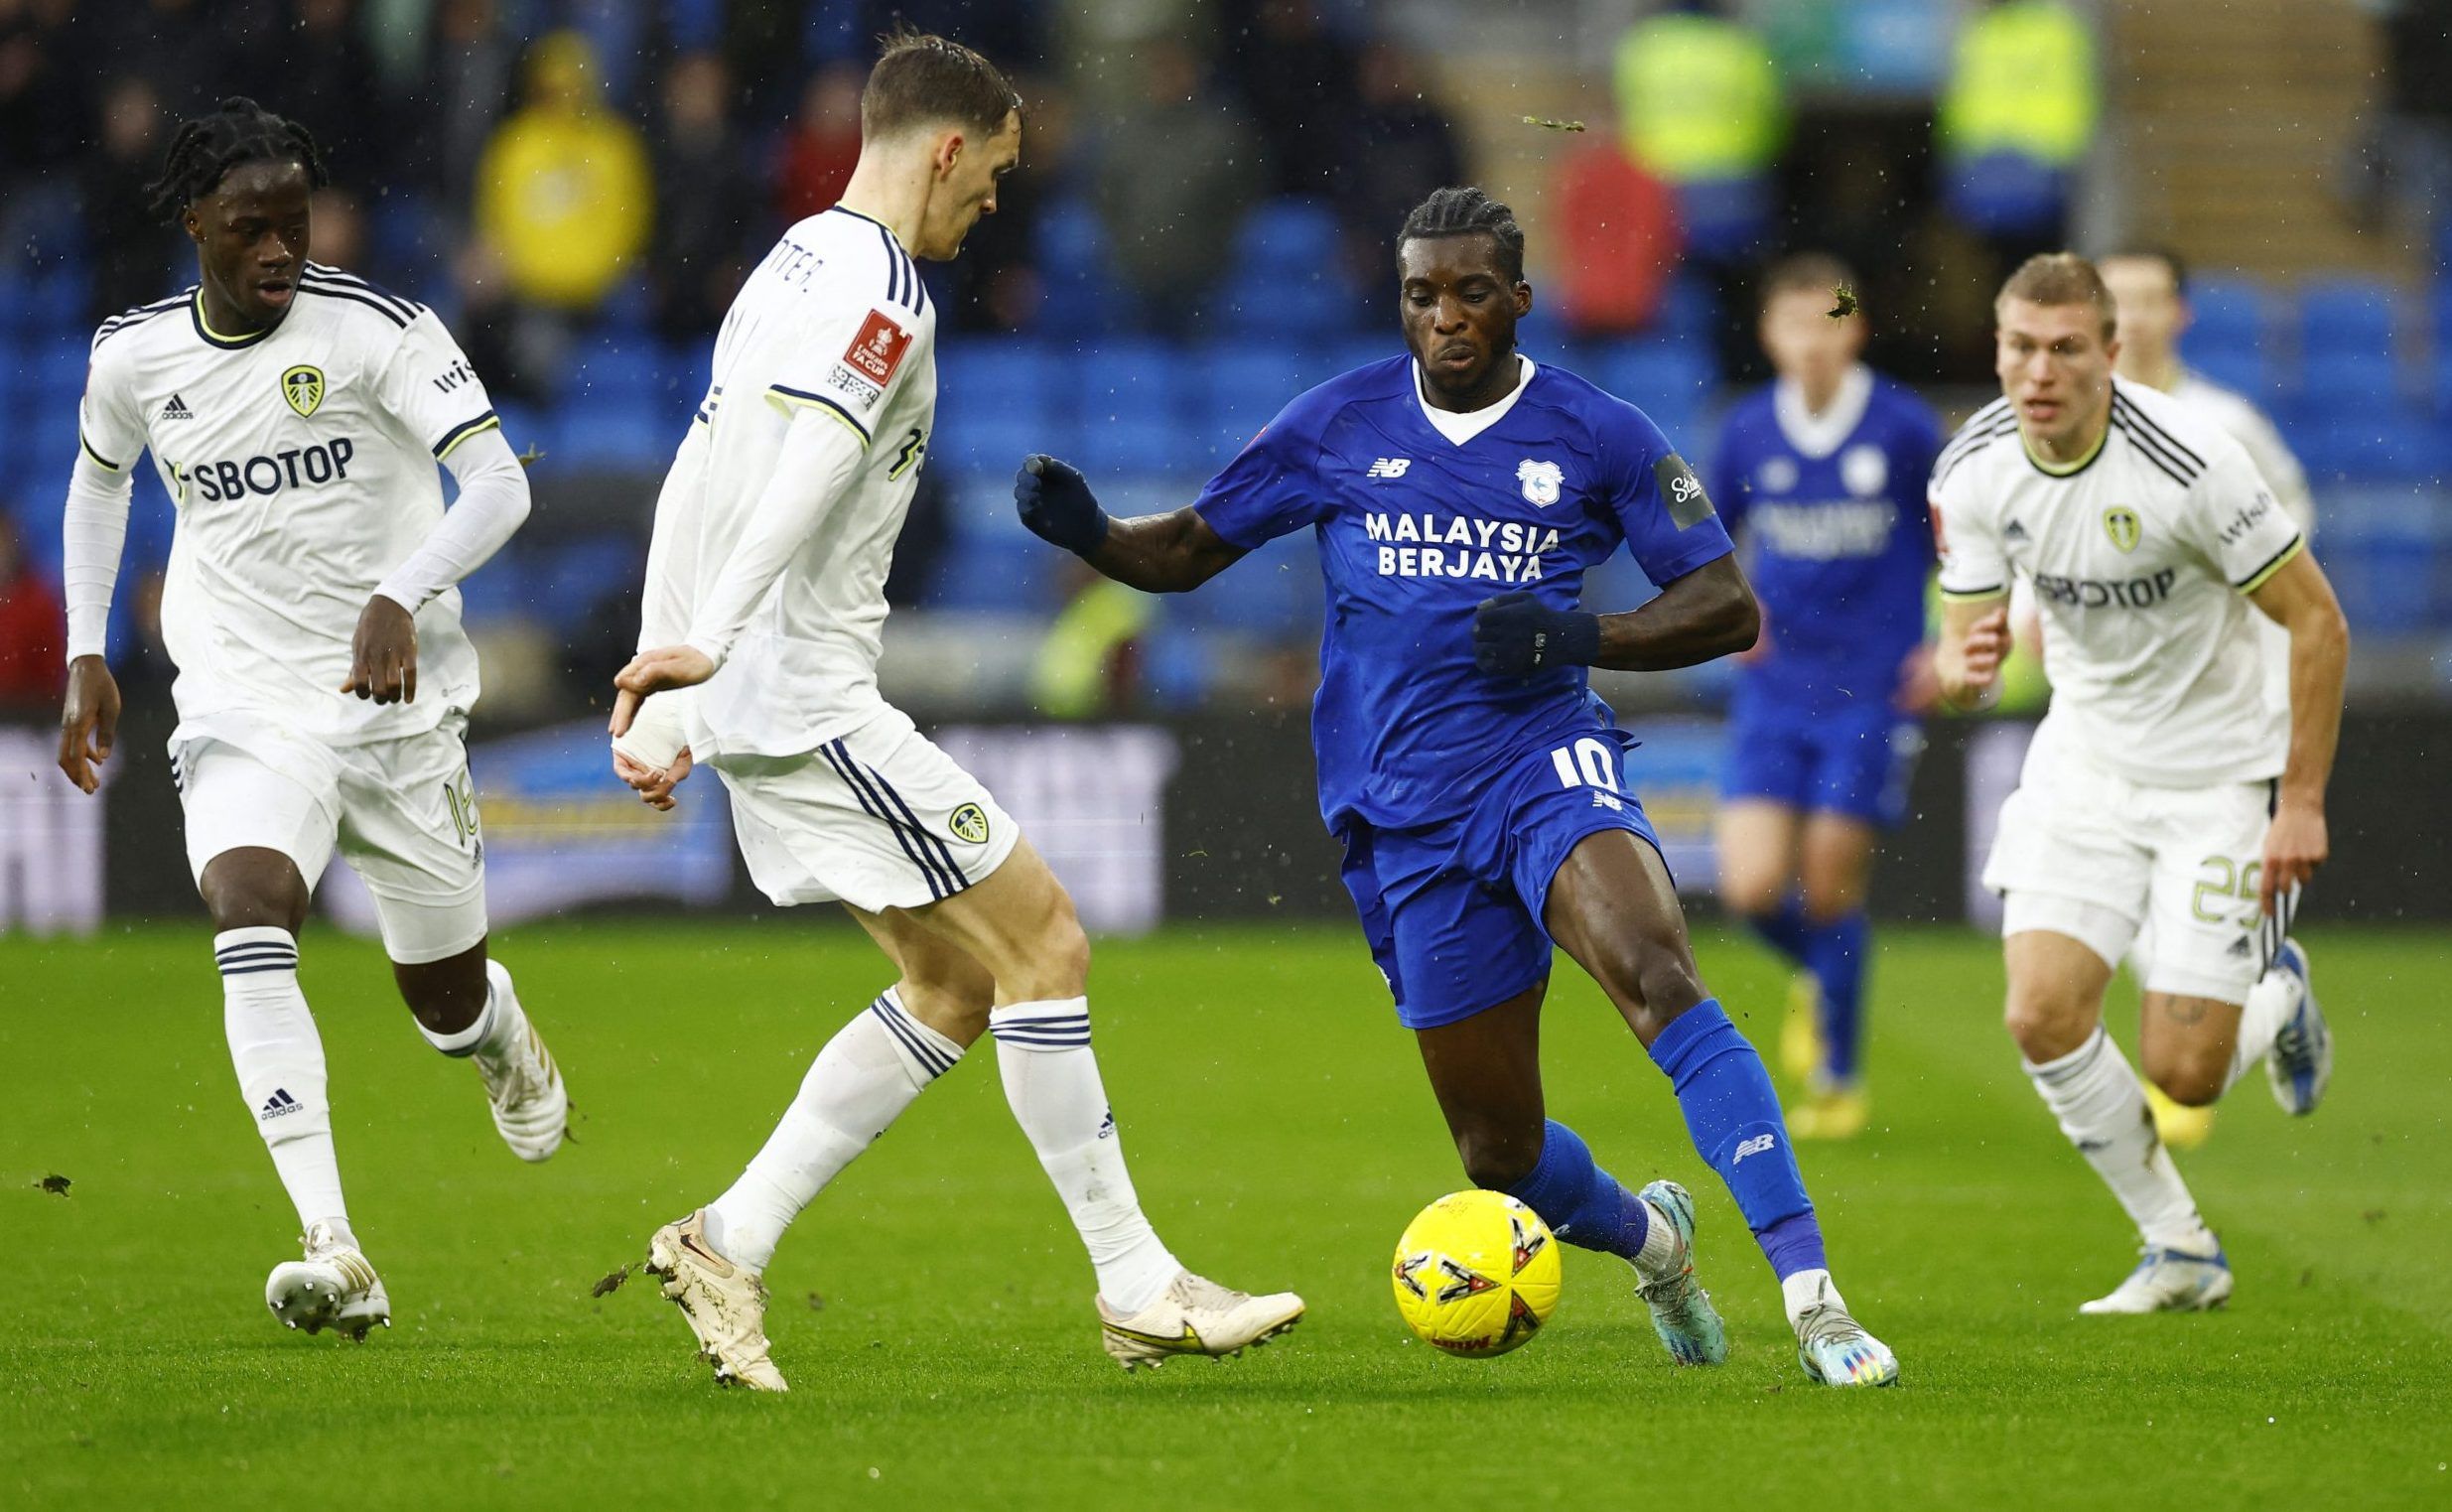 Leeds United defender Diego Llorente in action against Cardiff City.